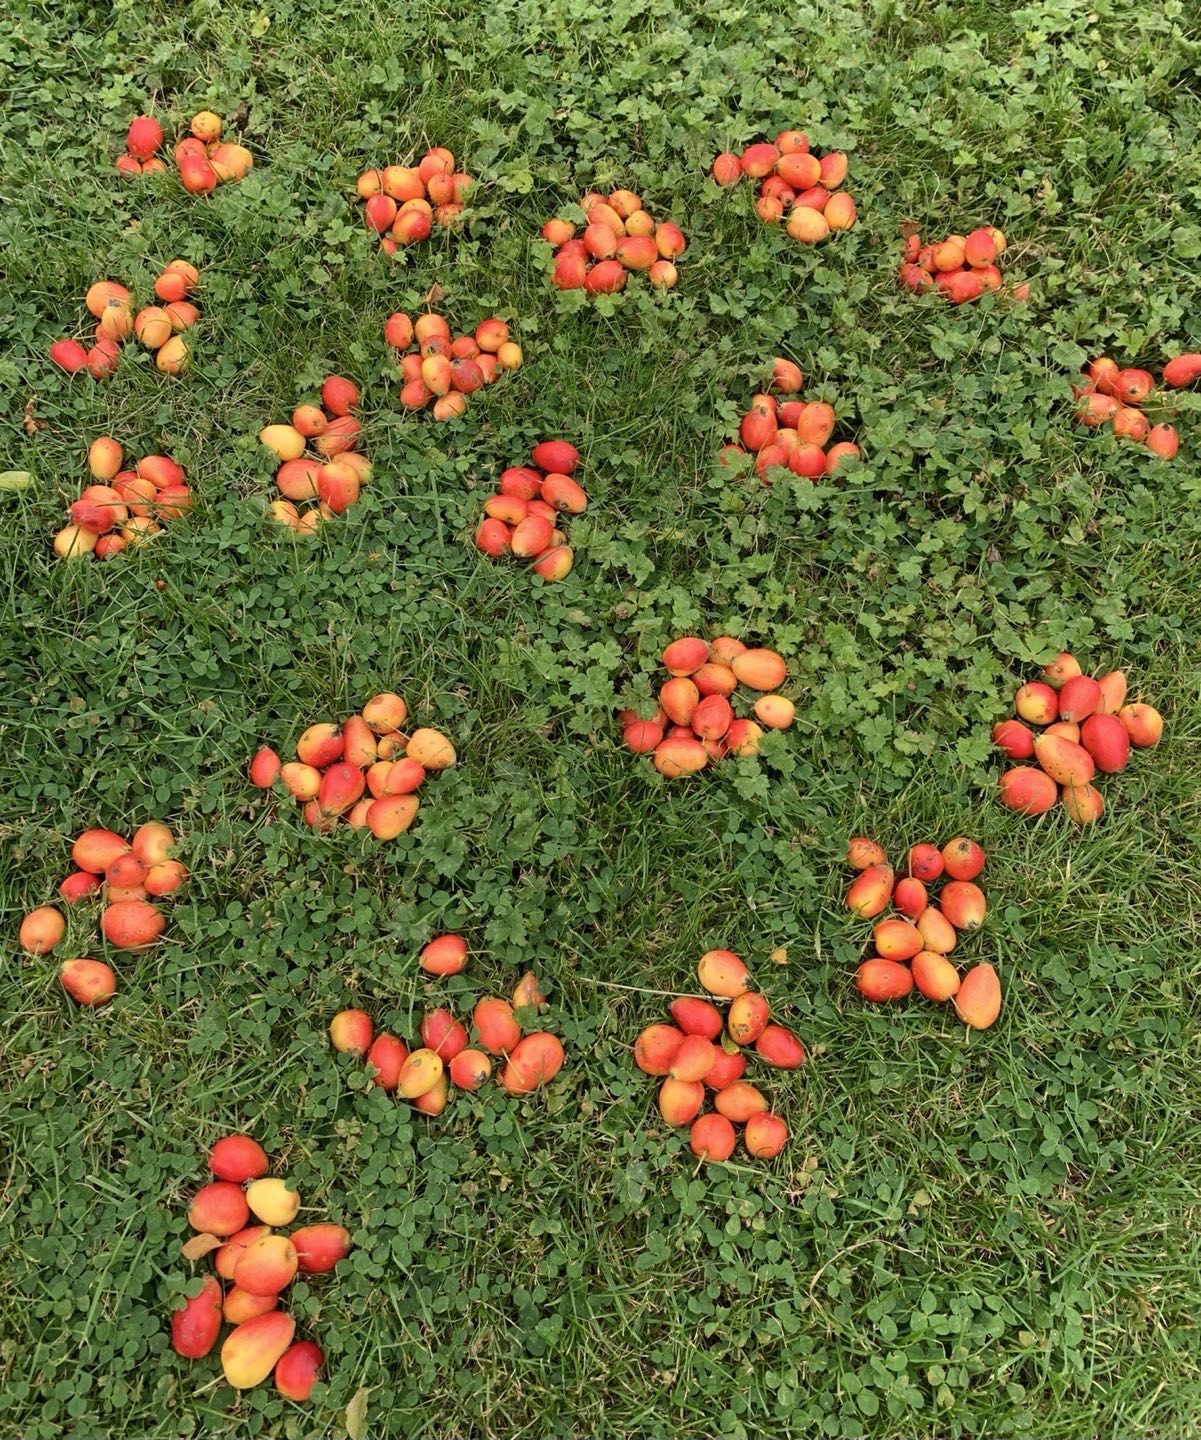 Crab apples placed in groups on the lawn for counting. Got to get the recipe right for this year’s Crab Apple Gin…! #gin #cotswolds #organic #artisan #mixology #cocktails #budtobottle